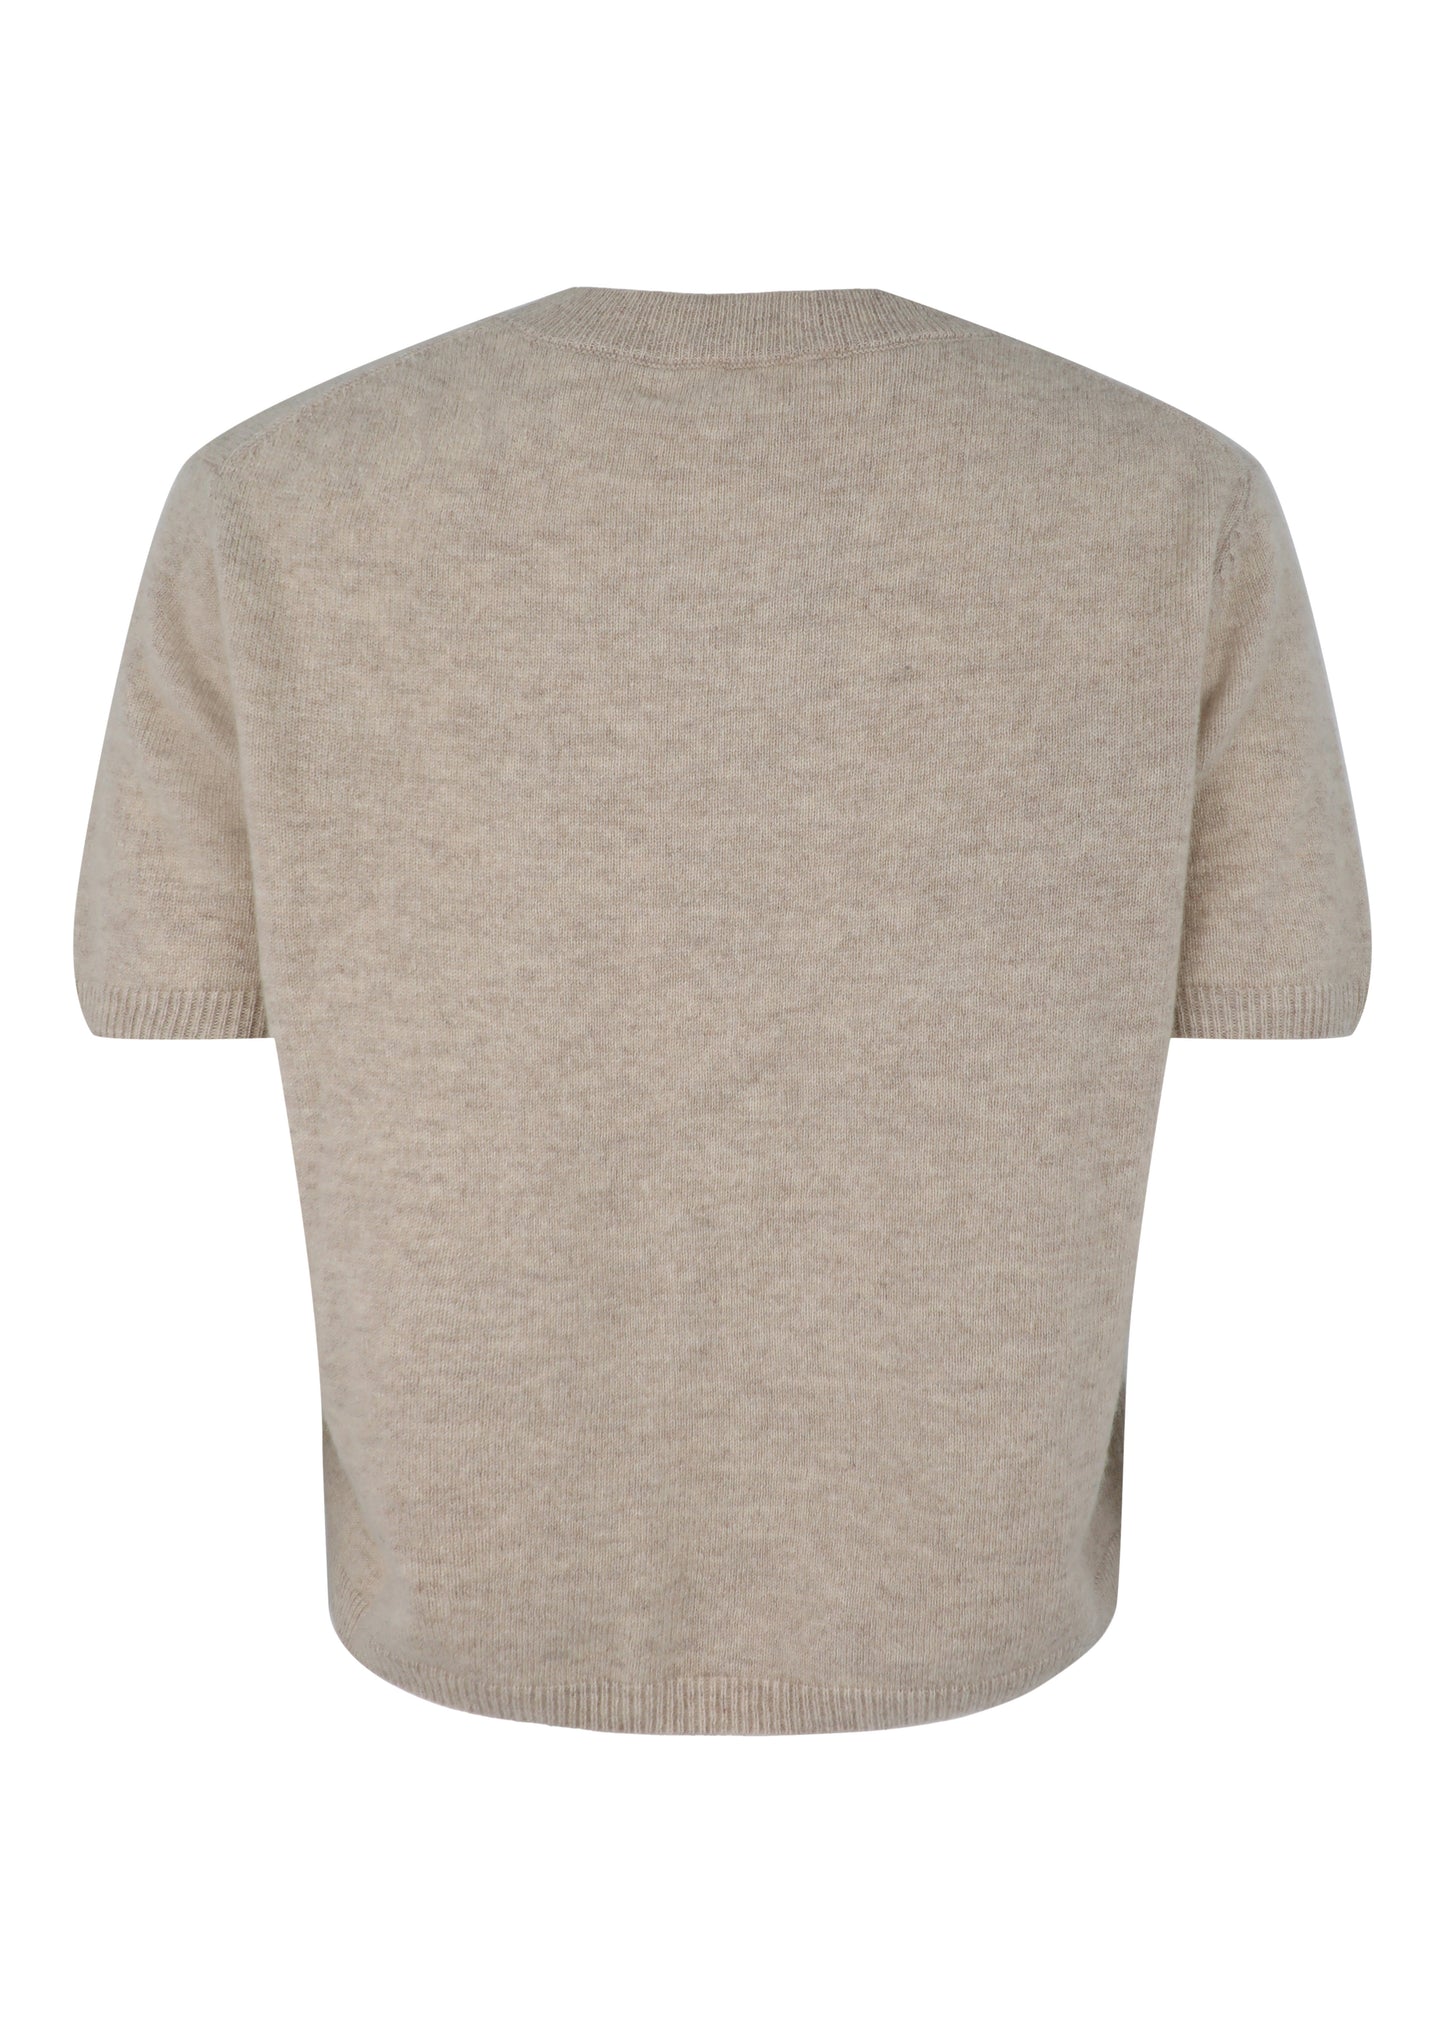 One Grey Day Kadri Cashmere Tee (More Colors)